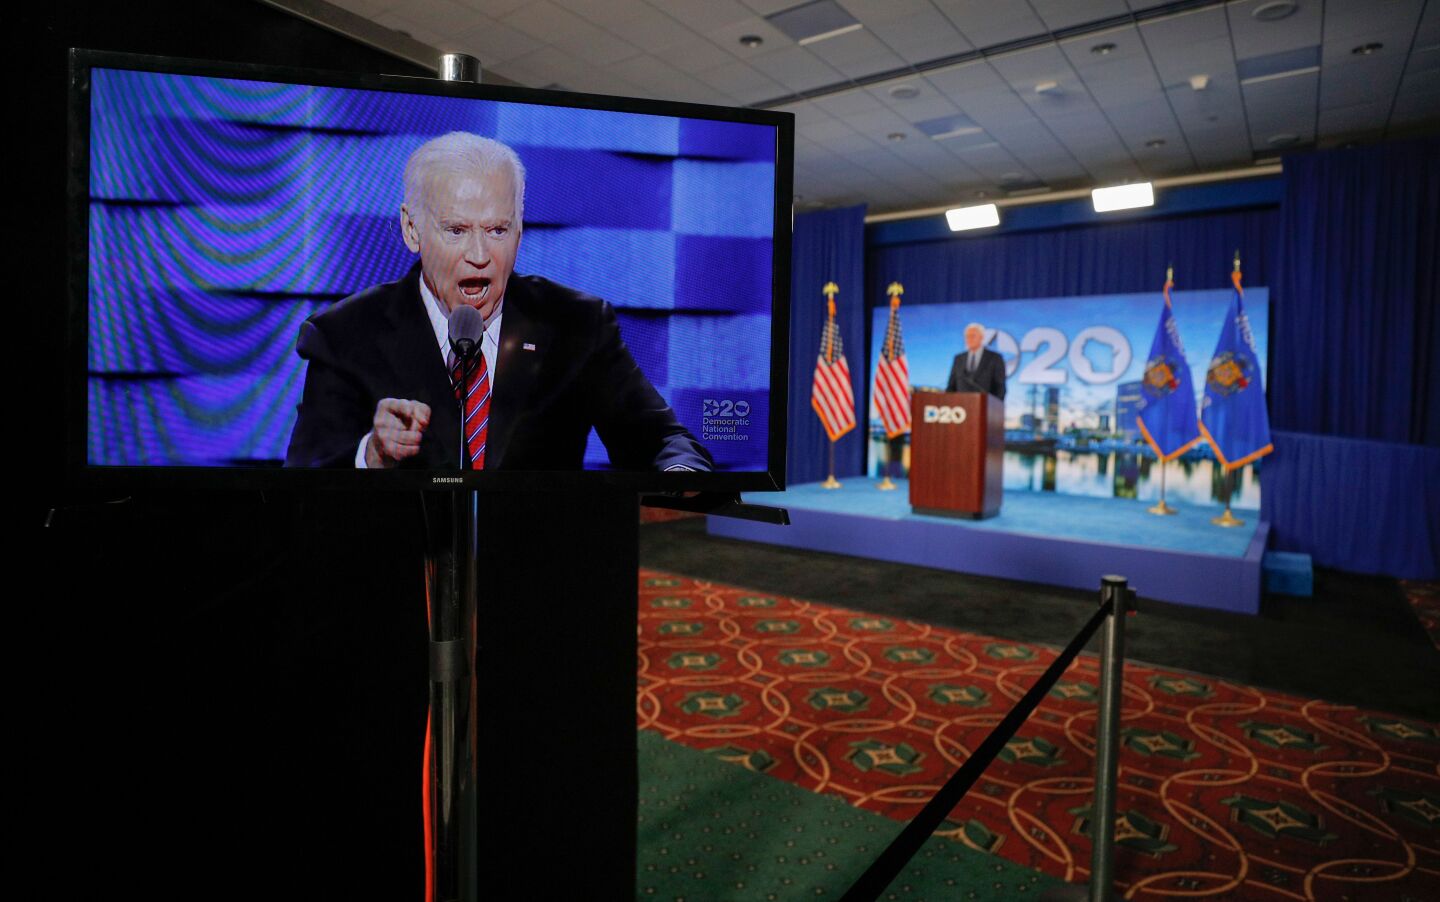 Joe Biden appears on a screen as Milwaukee Mayor Tom Barrett opens the second night of the Democratic National Convention.